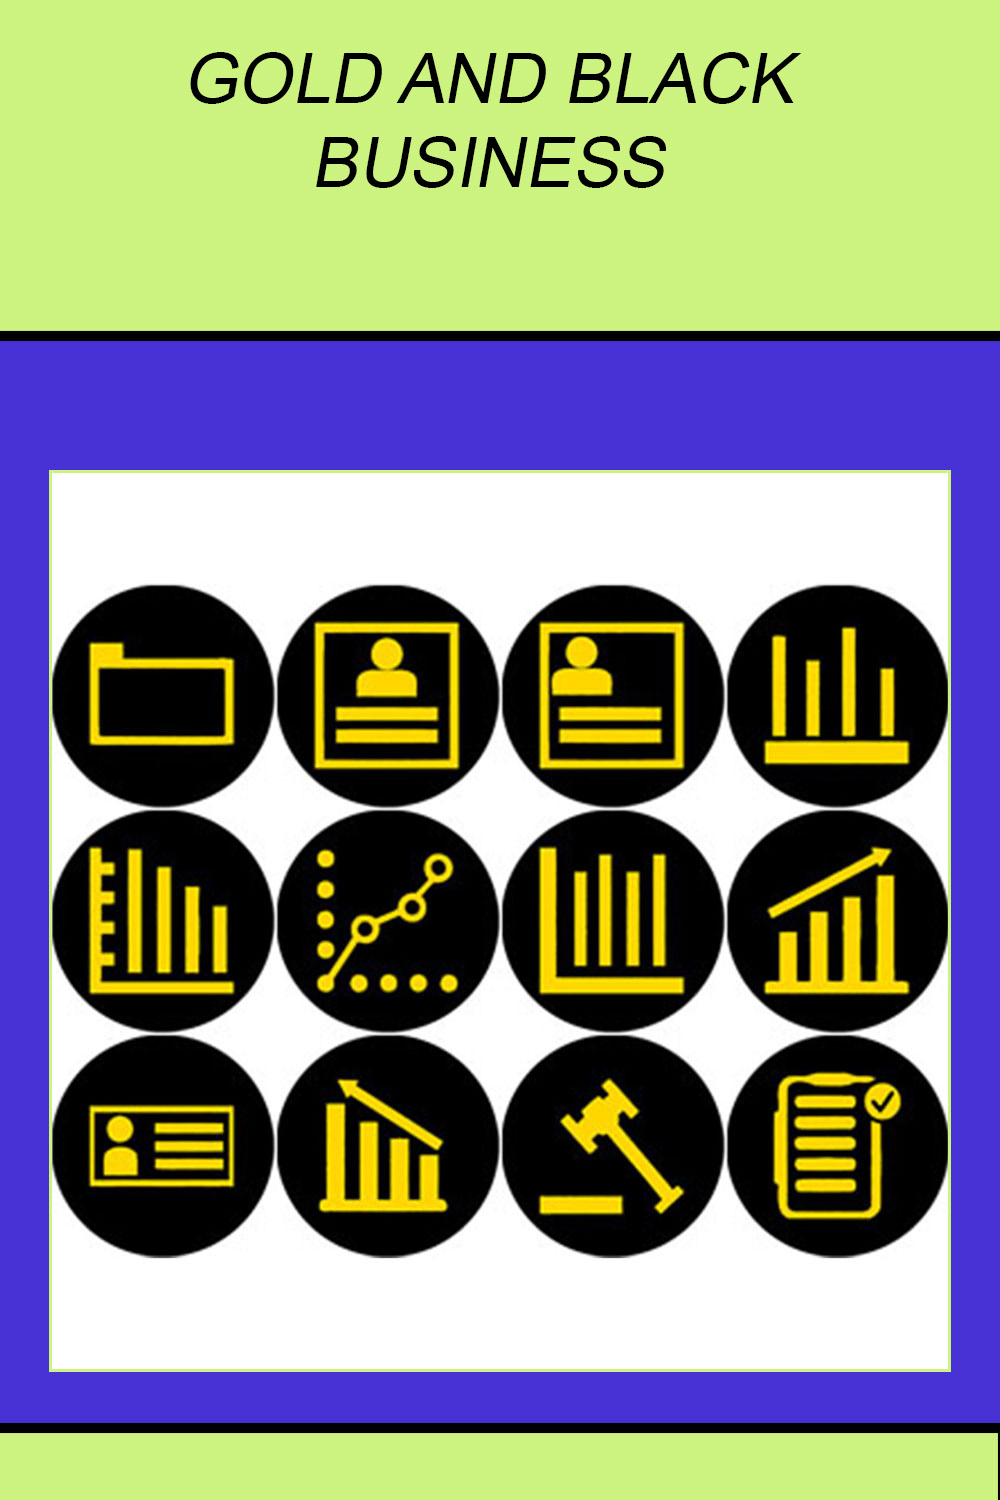 GOLD AND BLACK BUSINESS ICONS pinterest preview image.